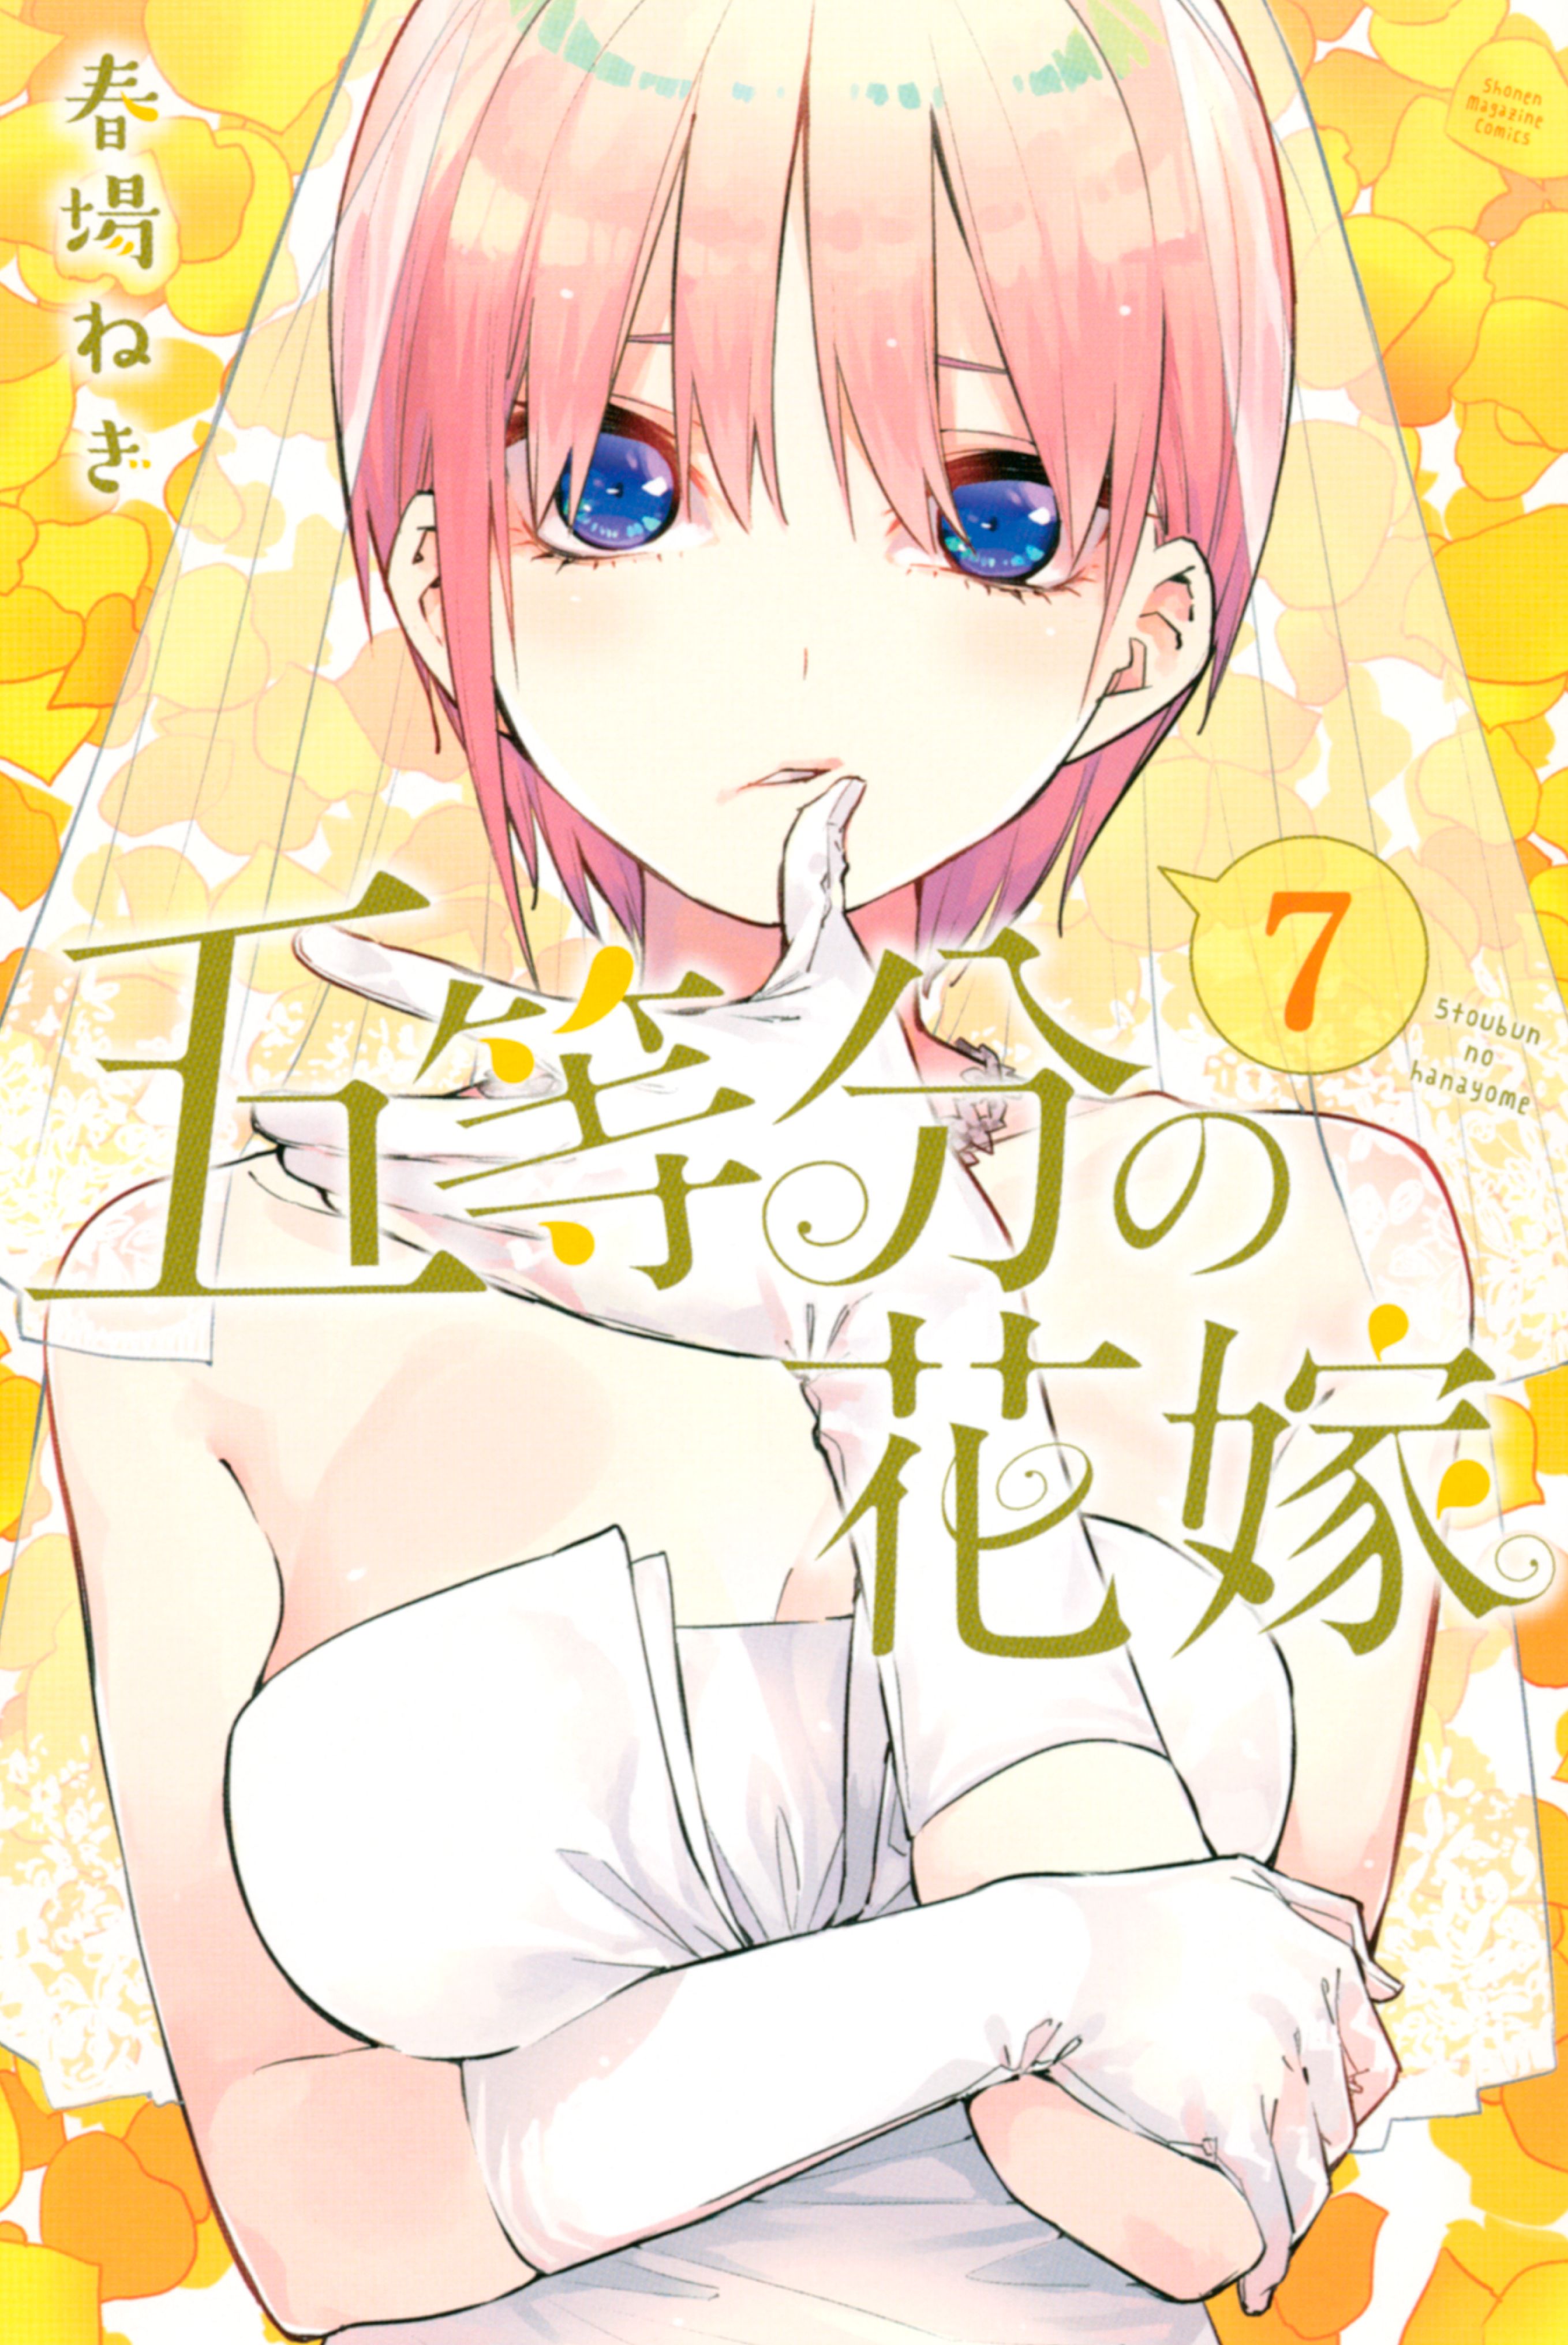 The Quintessential Quintuplets - Full Color Edition